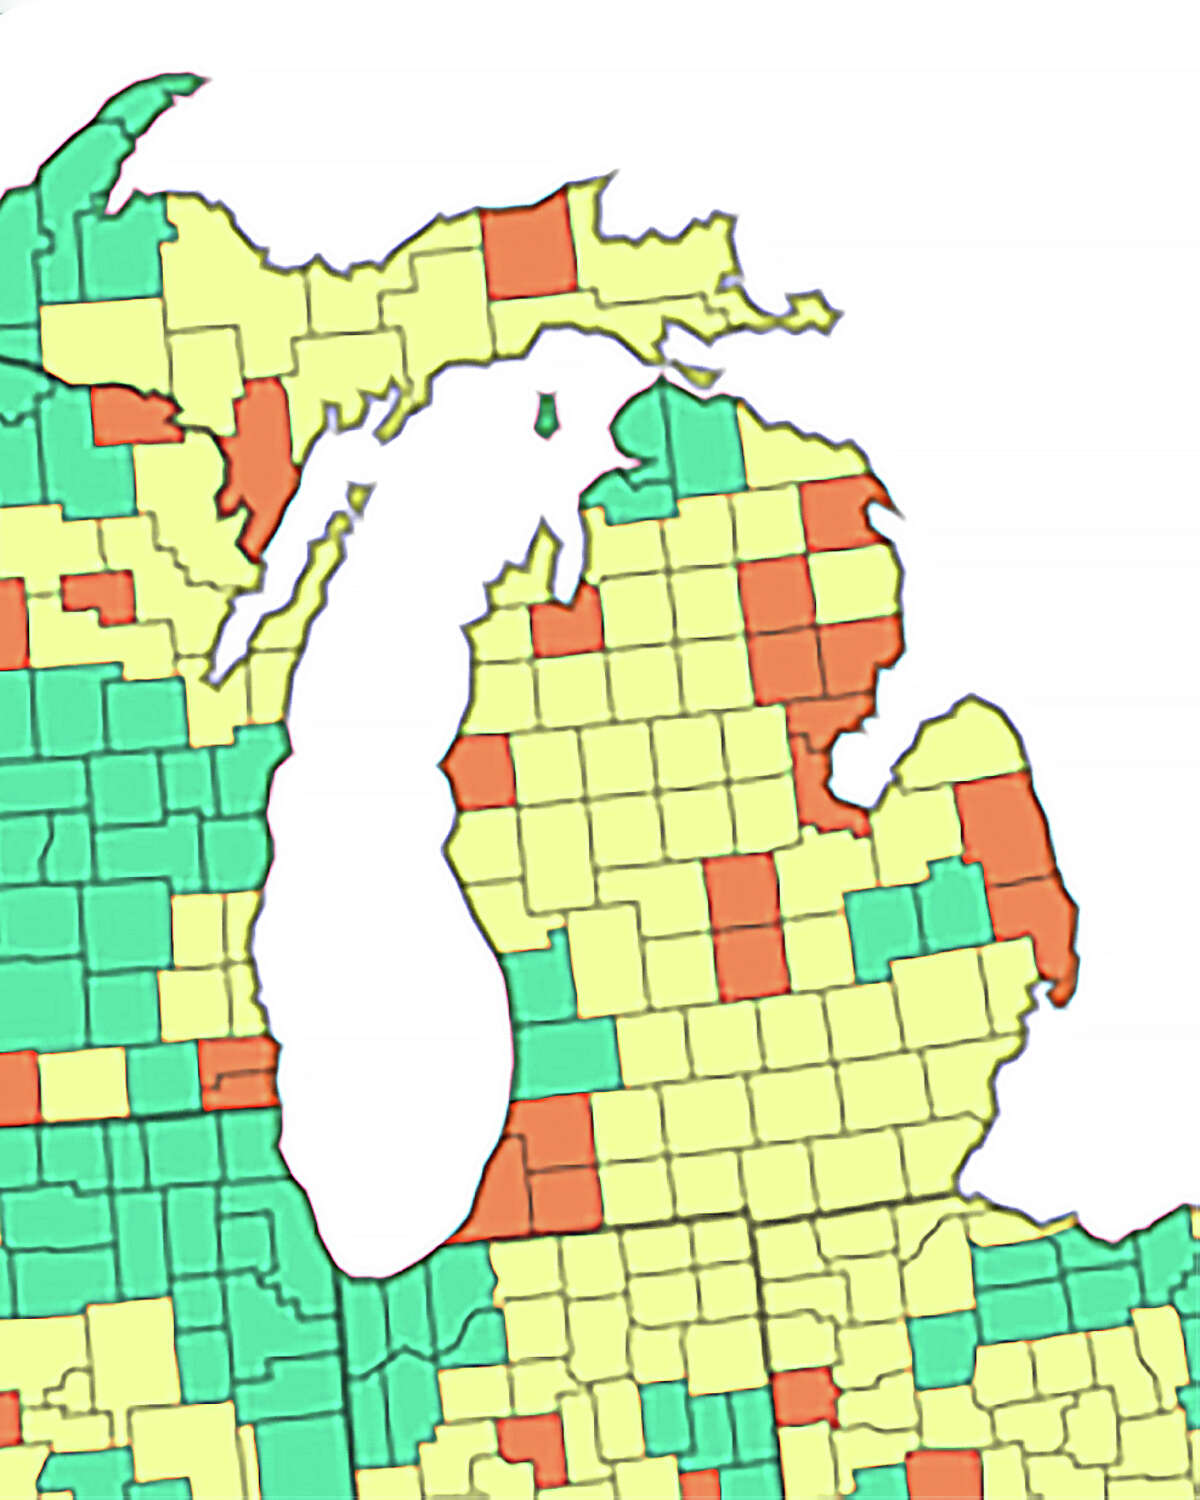 Mecosta, Osceola, and Lake counties are in the medium level for community transmission, per CDC's new calculation methods. Recommendations for this level include: 1. If you are at high risk for severe illness, talk to your healthcare provider about whether you need to wear a mask and take other precautions 2. Stay up to date with COVID-19 vaccines 3. Get tested if you have symptoms